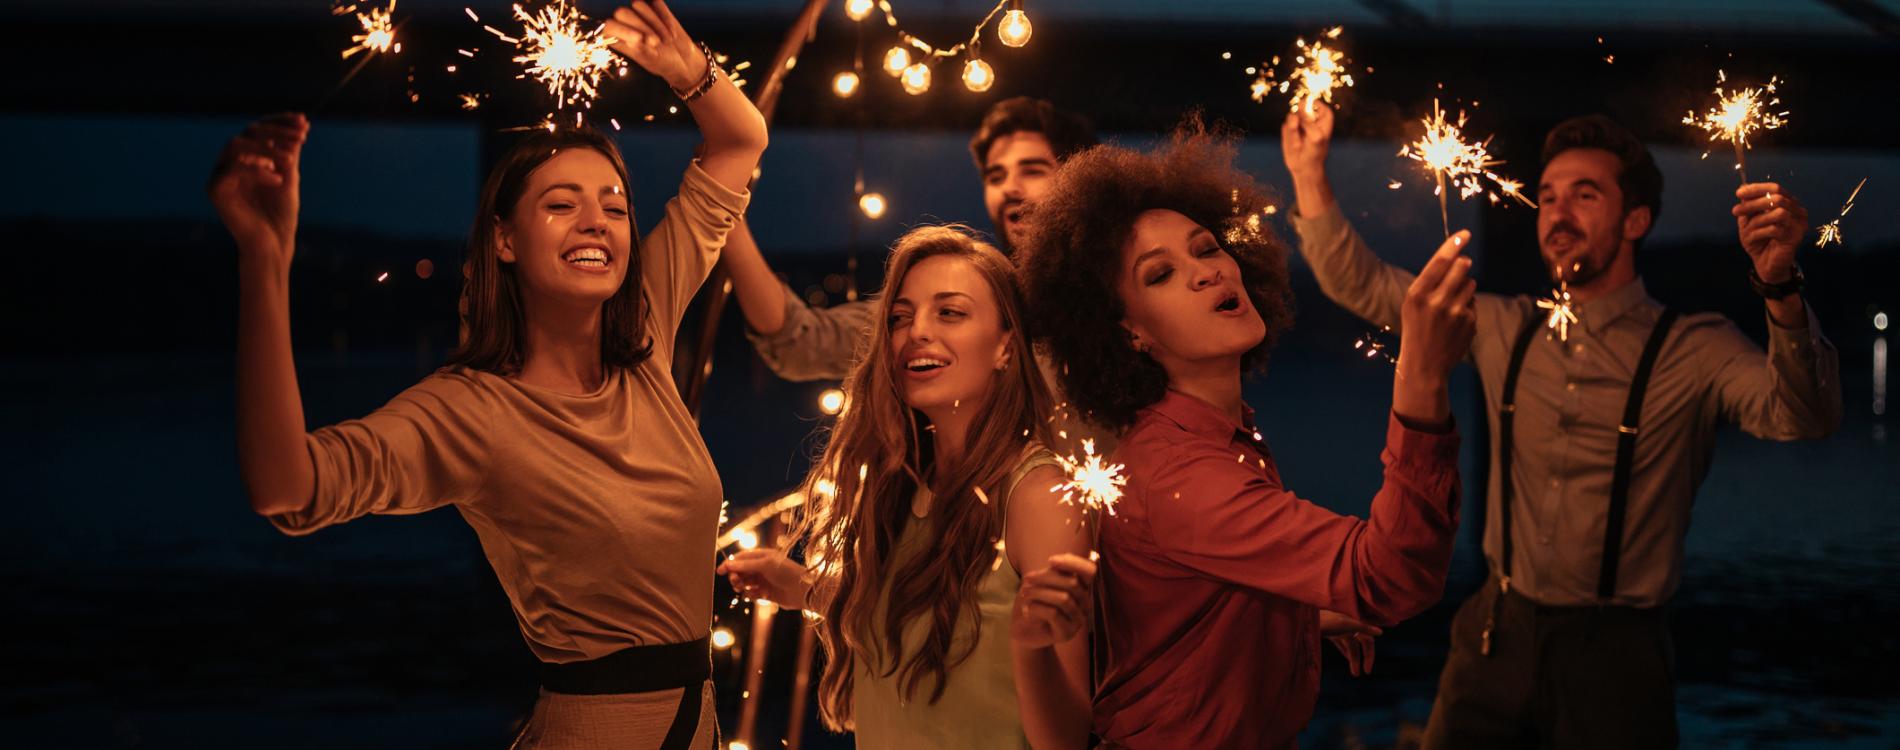 People dancing in a party with sparklers.